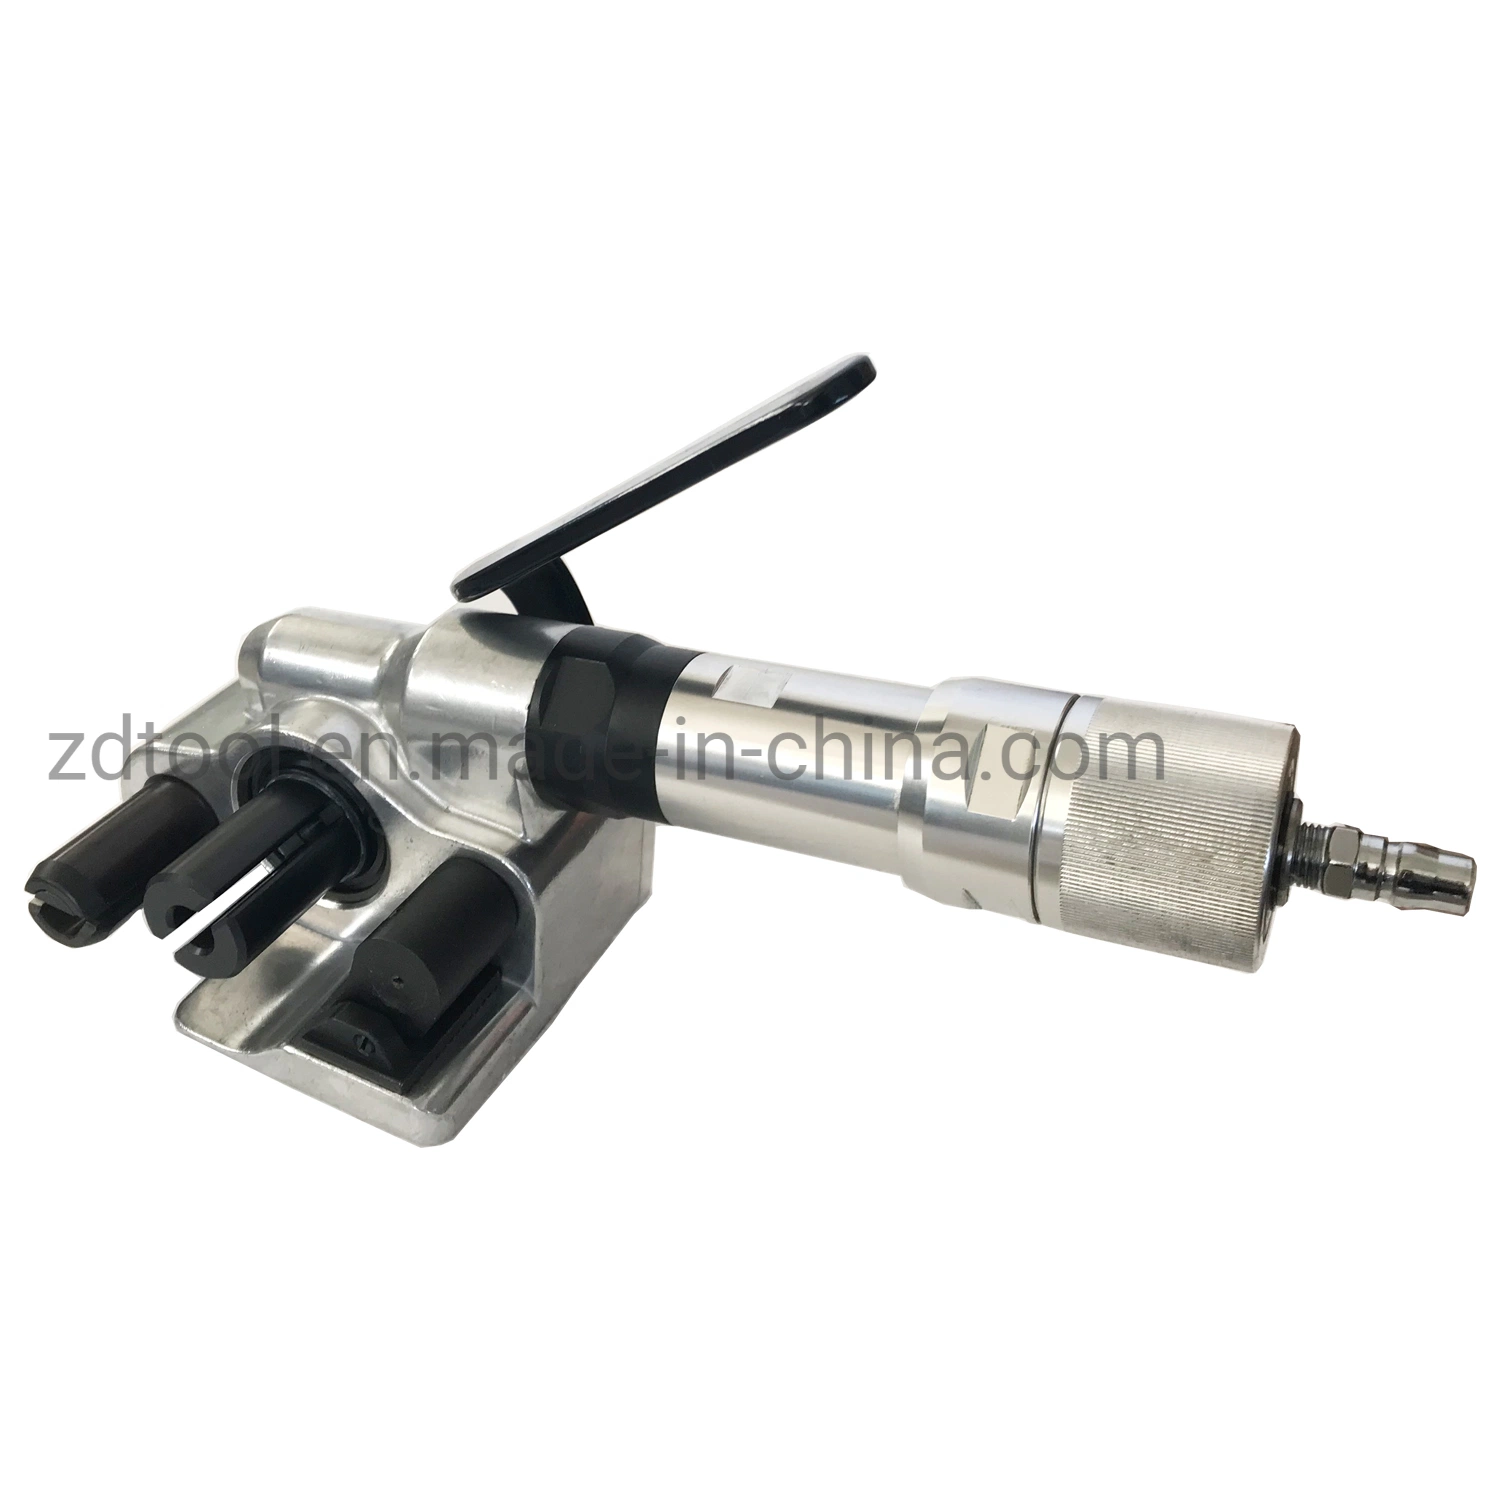 Pneumatic Tensioner for Cord Strapping